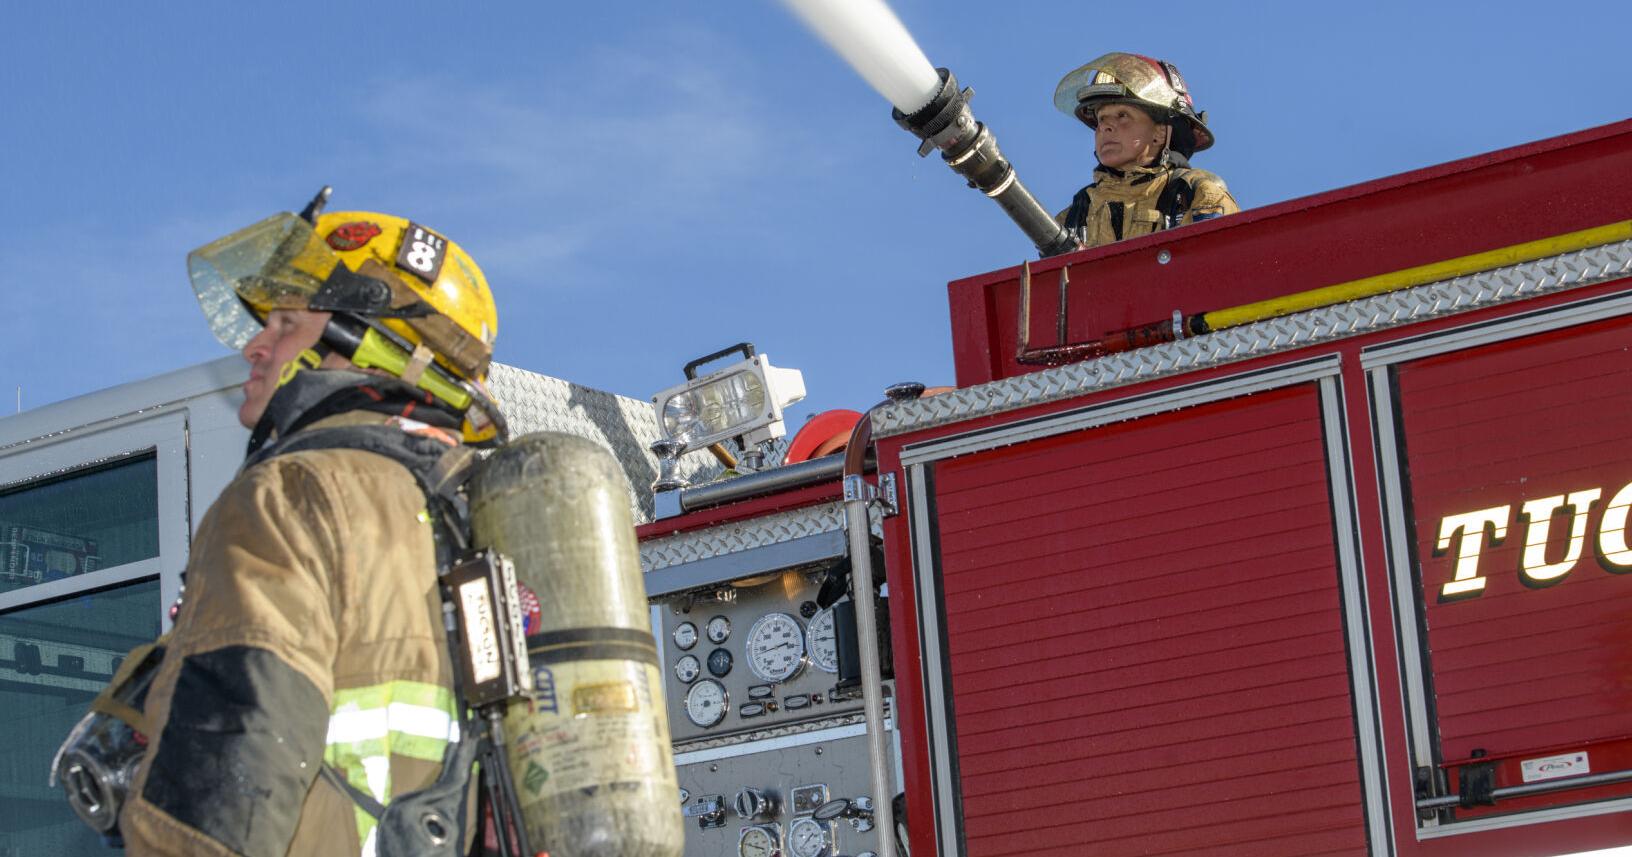 ABOR Regents’ Grant to study ways to reduce cancer risk in Arizona firefighters